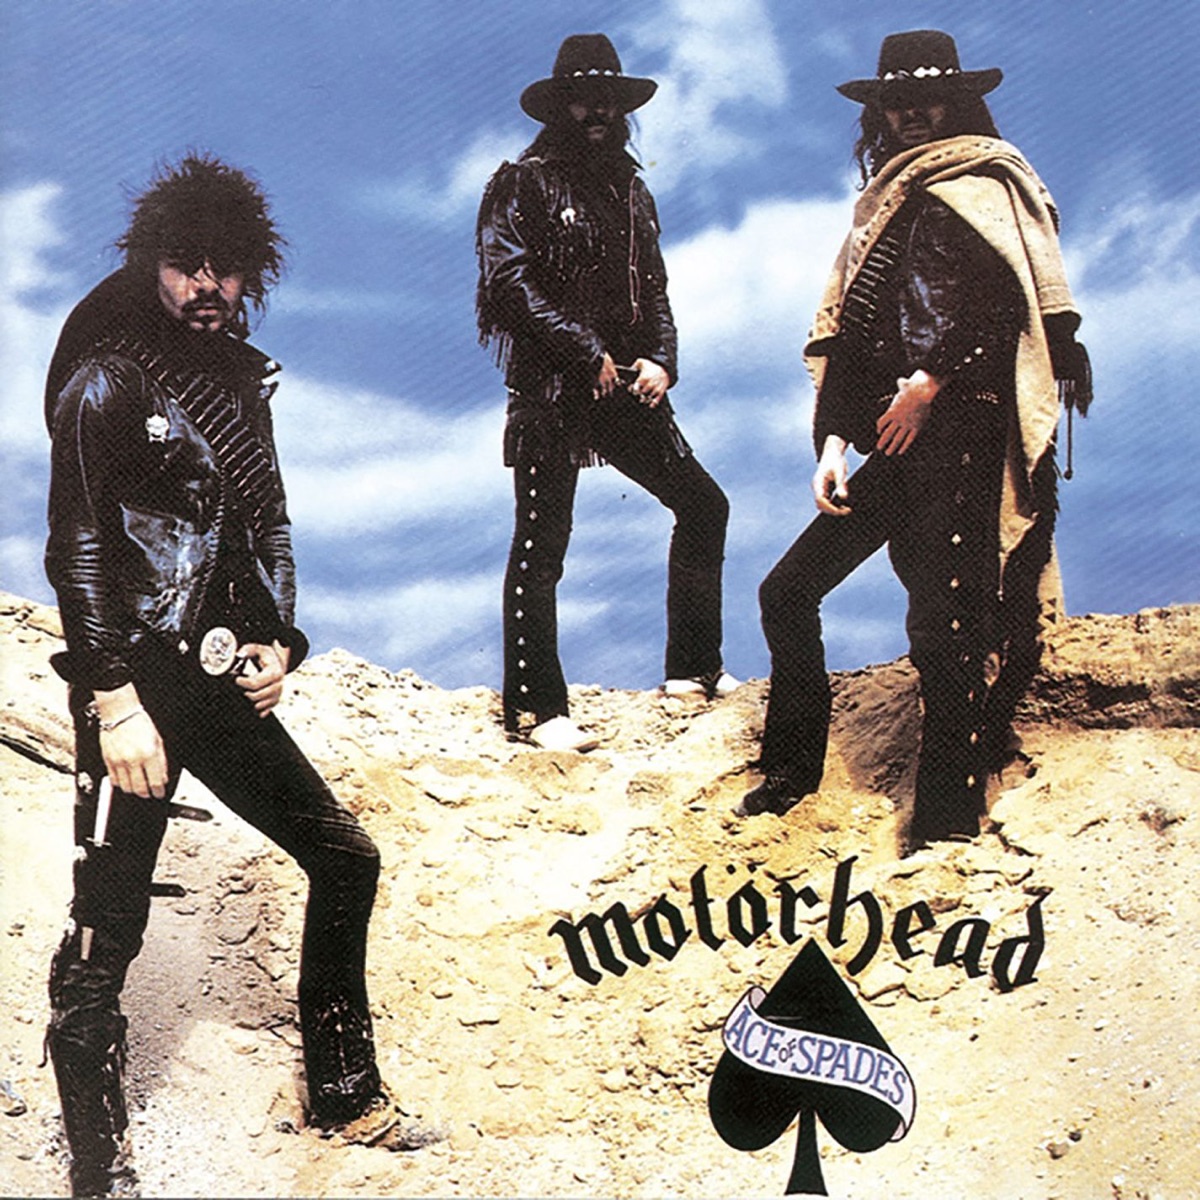 Art for Ace of Spades by Motörhead